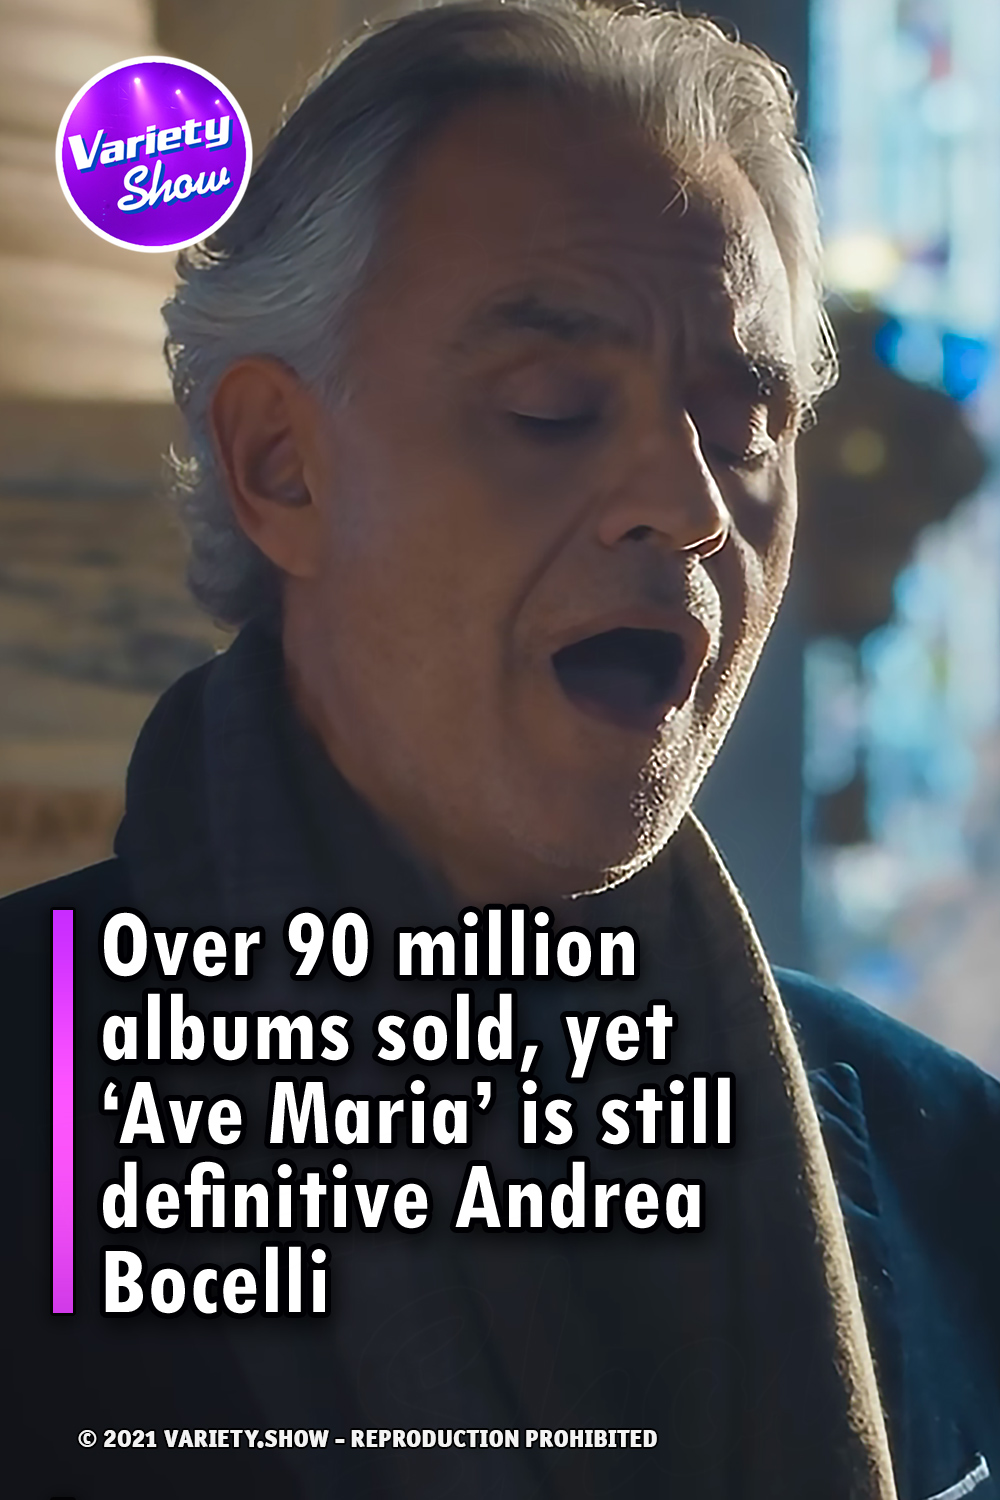 Over 90 million albums sold, yet ‘Ave Maria’ is still definitive Andrea Bocelli